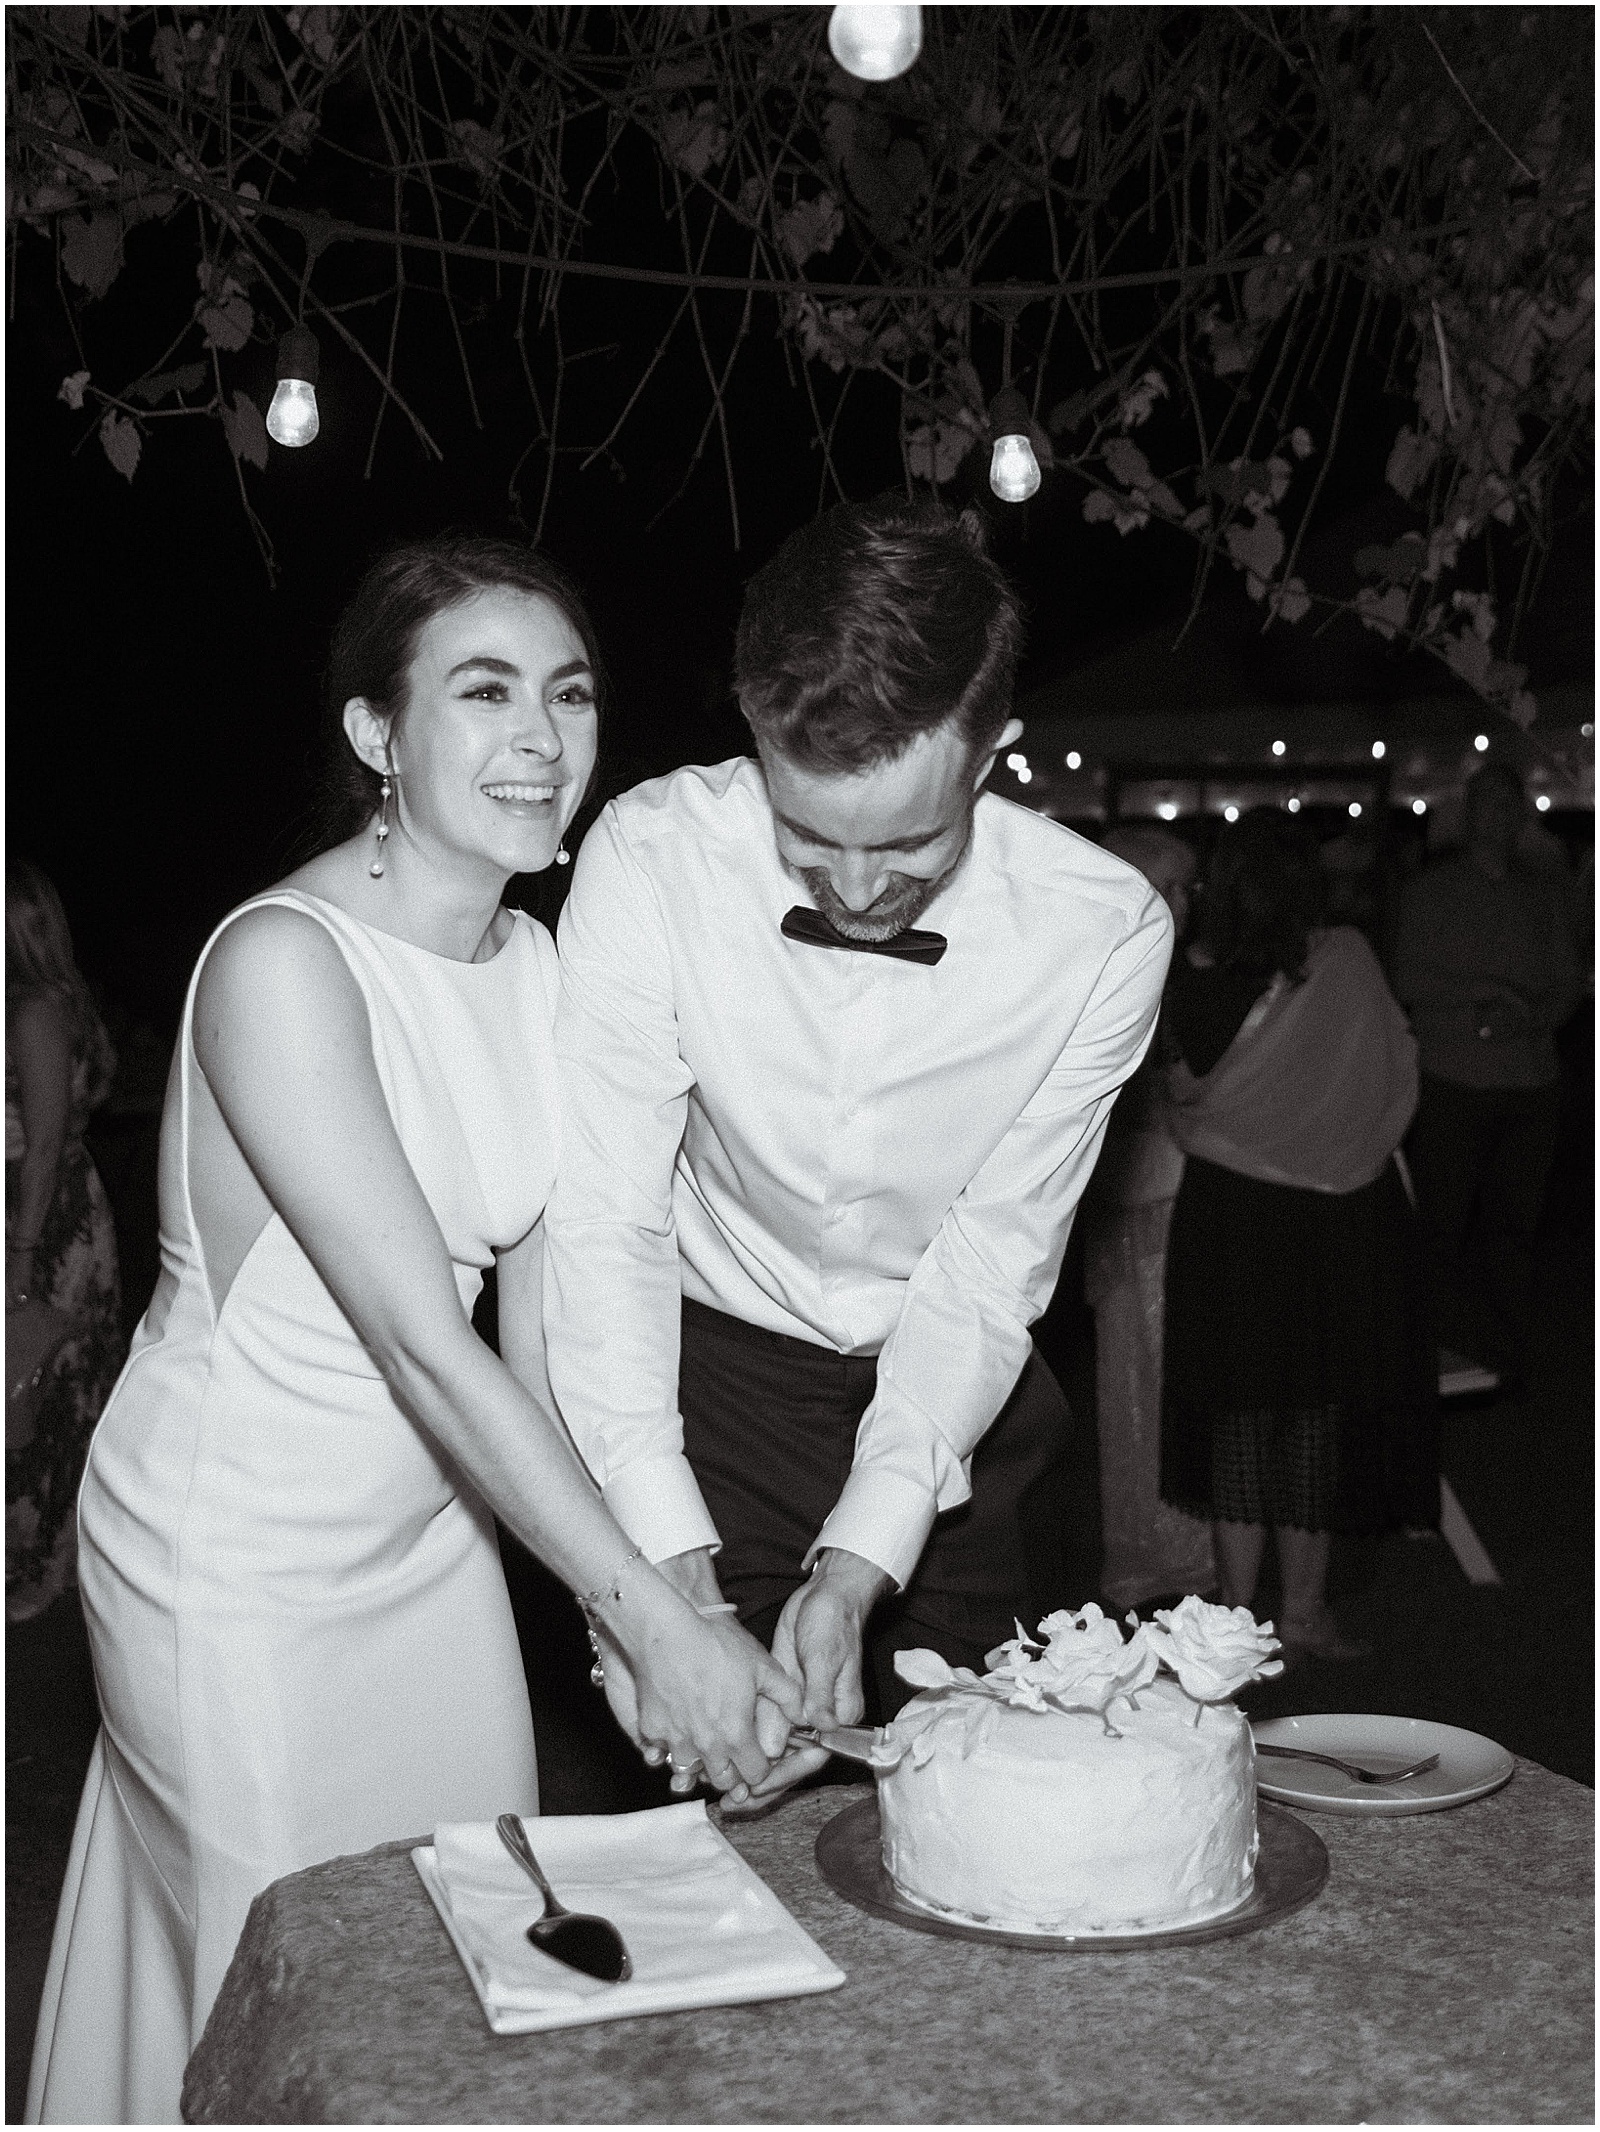 Bride and groom cutting their cake at Boston wedding - by Kelly Stevens Photography